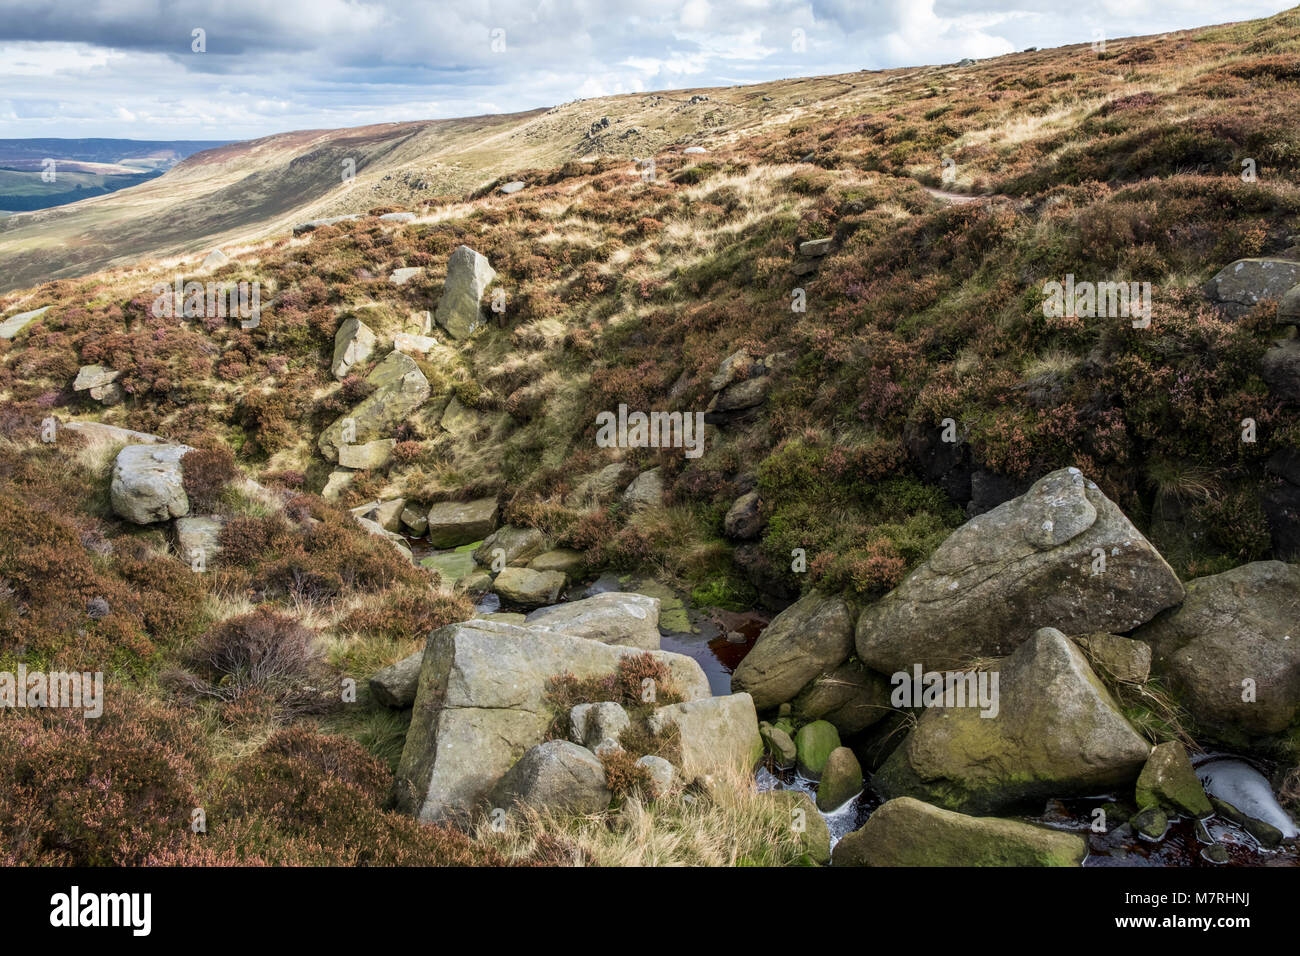 An Autumn view along Blackden Edge with Blackden Brook flowing down the moorland hillside. Kinder Scout, Derbyshire, Peak District, England, UK Stock Photo